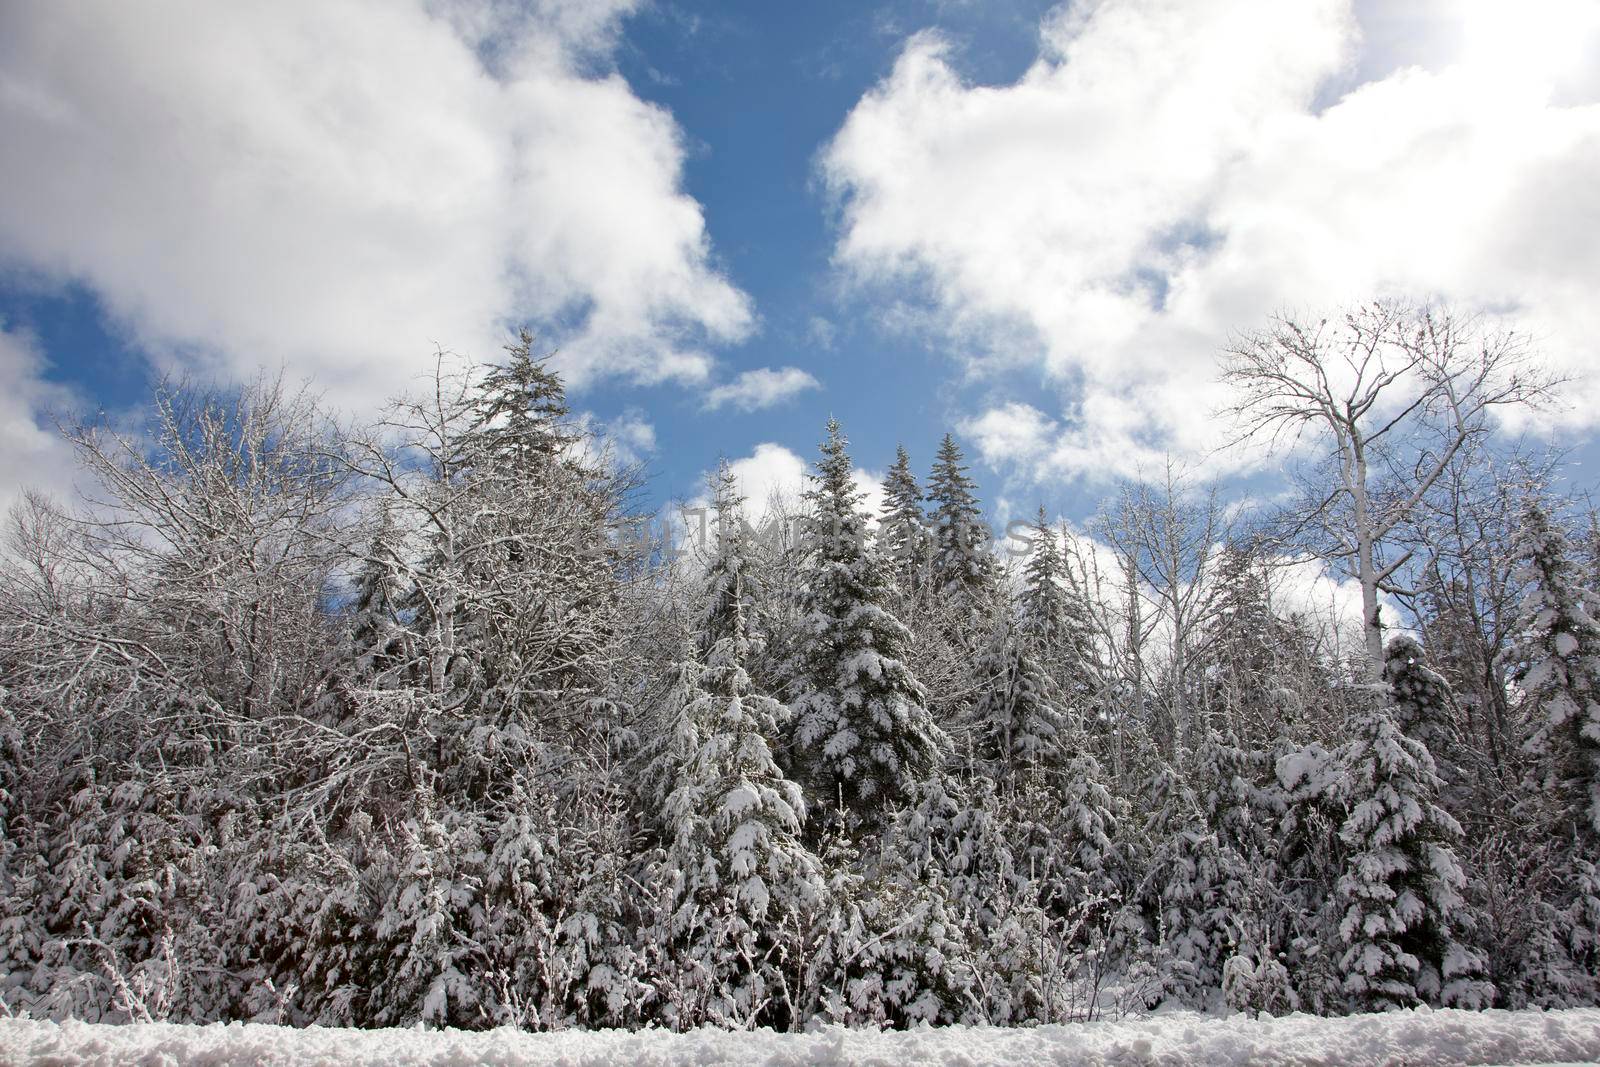  evergreen trees covered in perfect snow on a blue sky day 